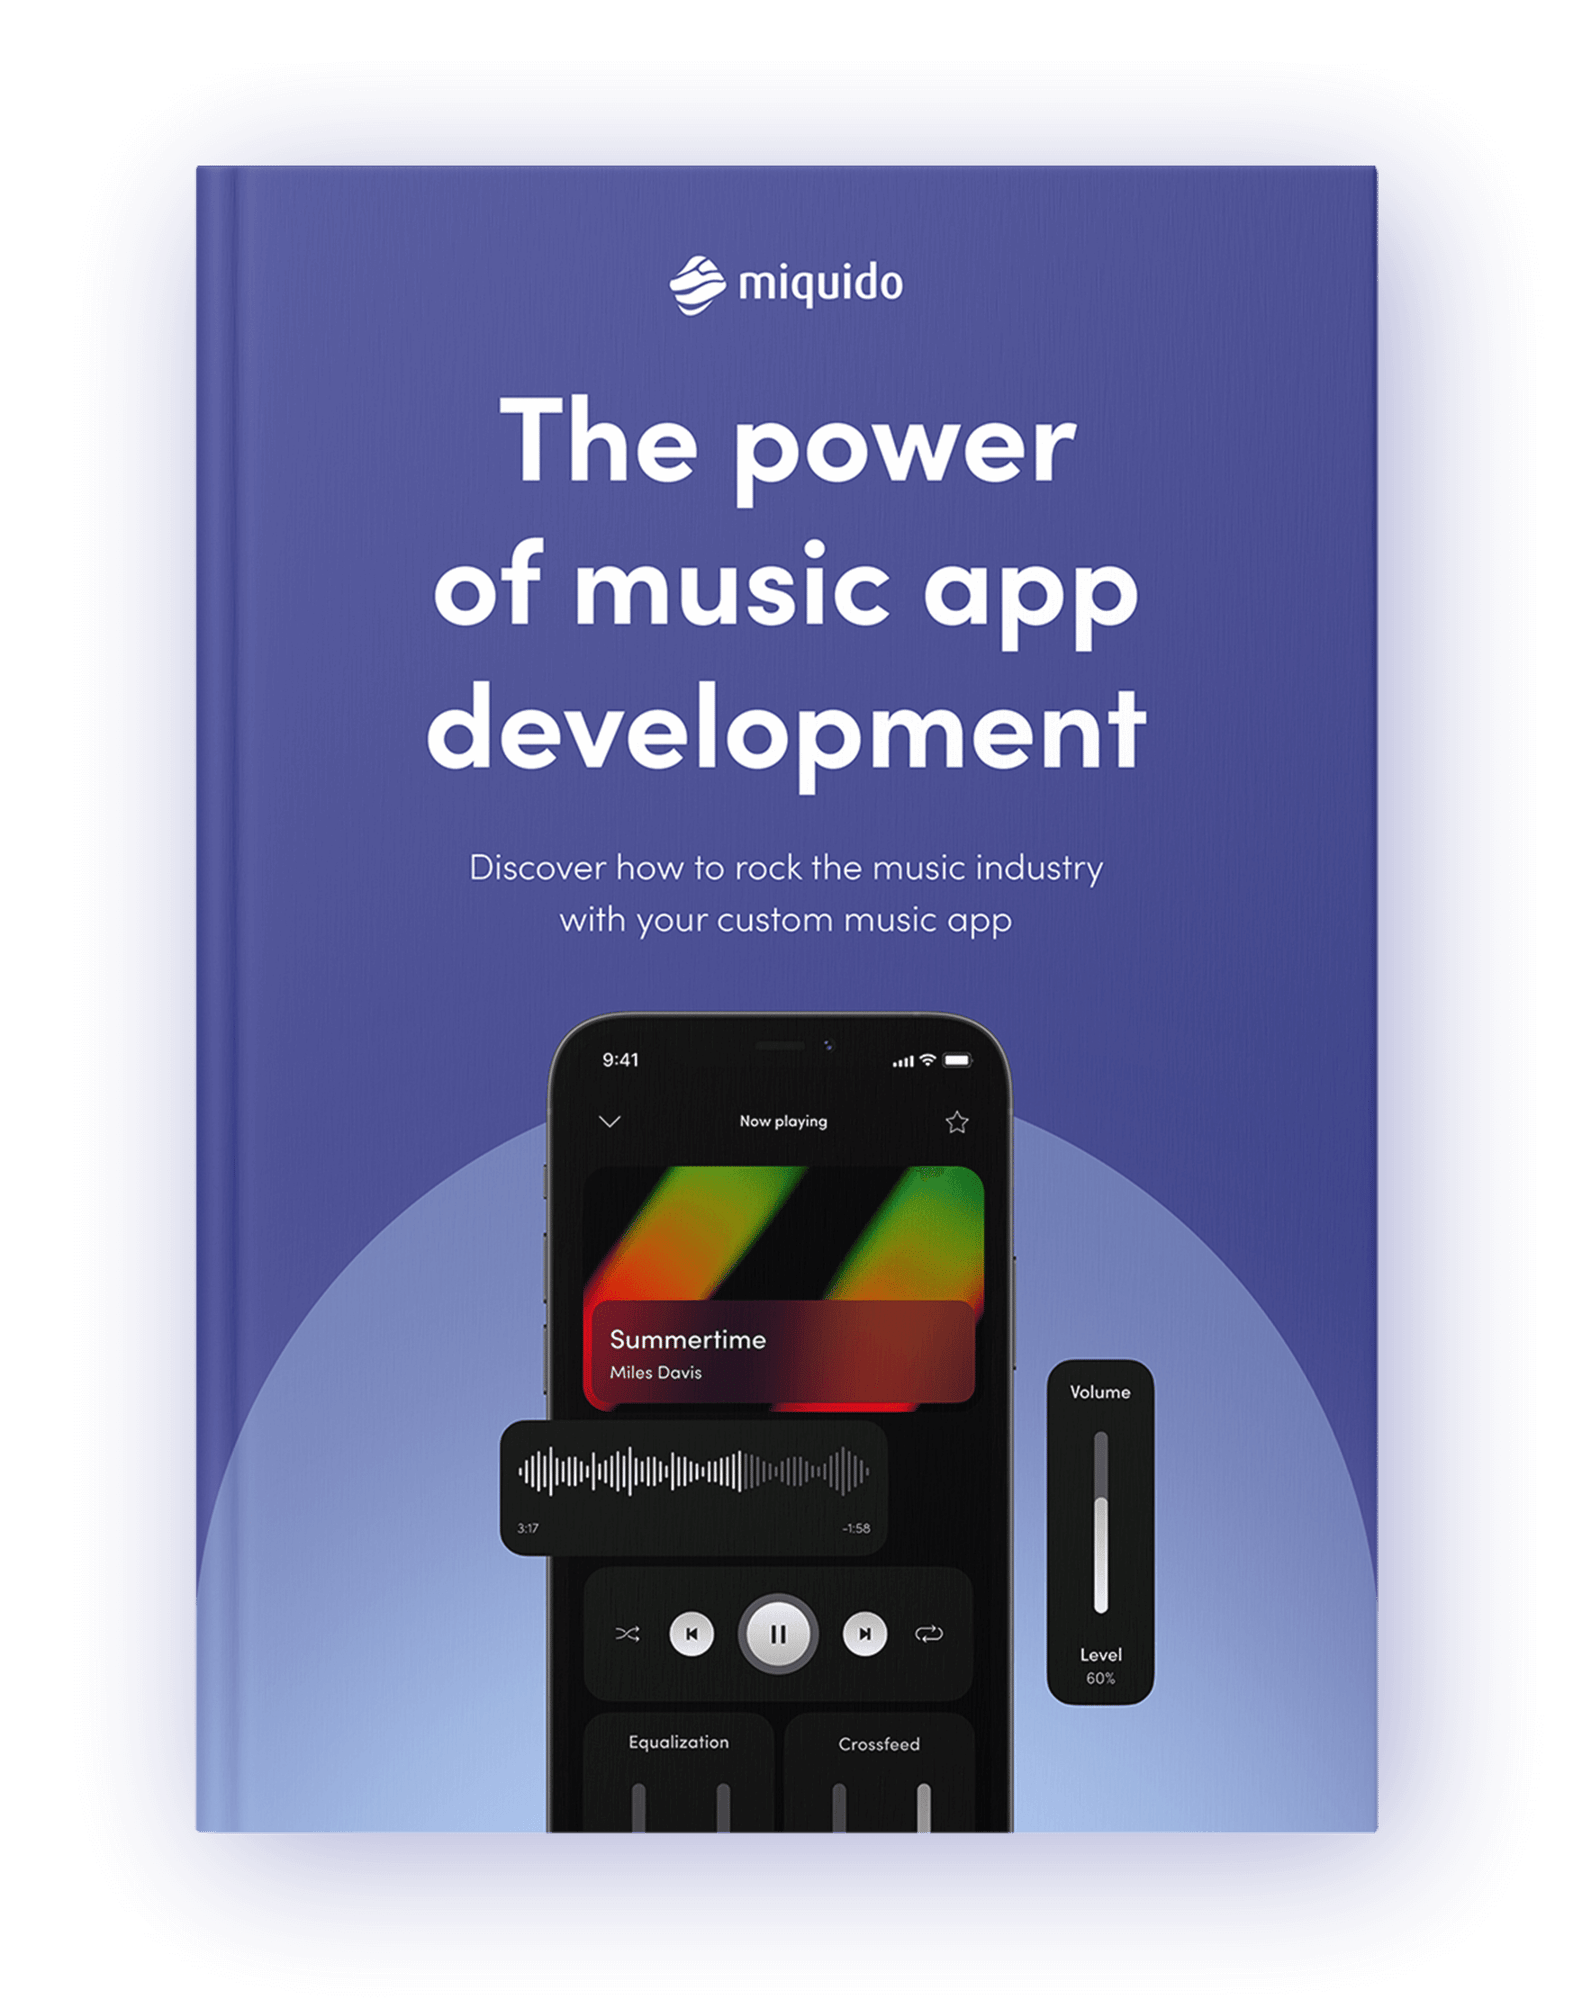 The power of music app development – Shadow book cover mockup (1)